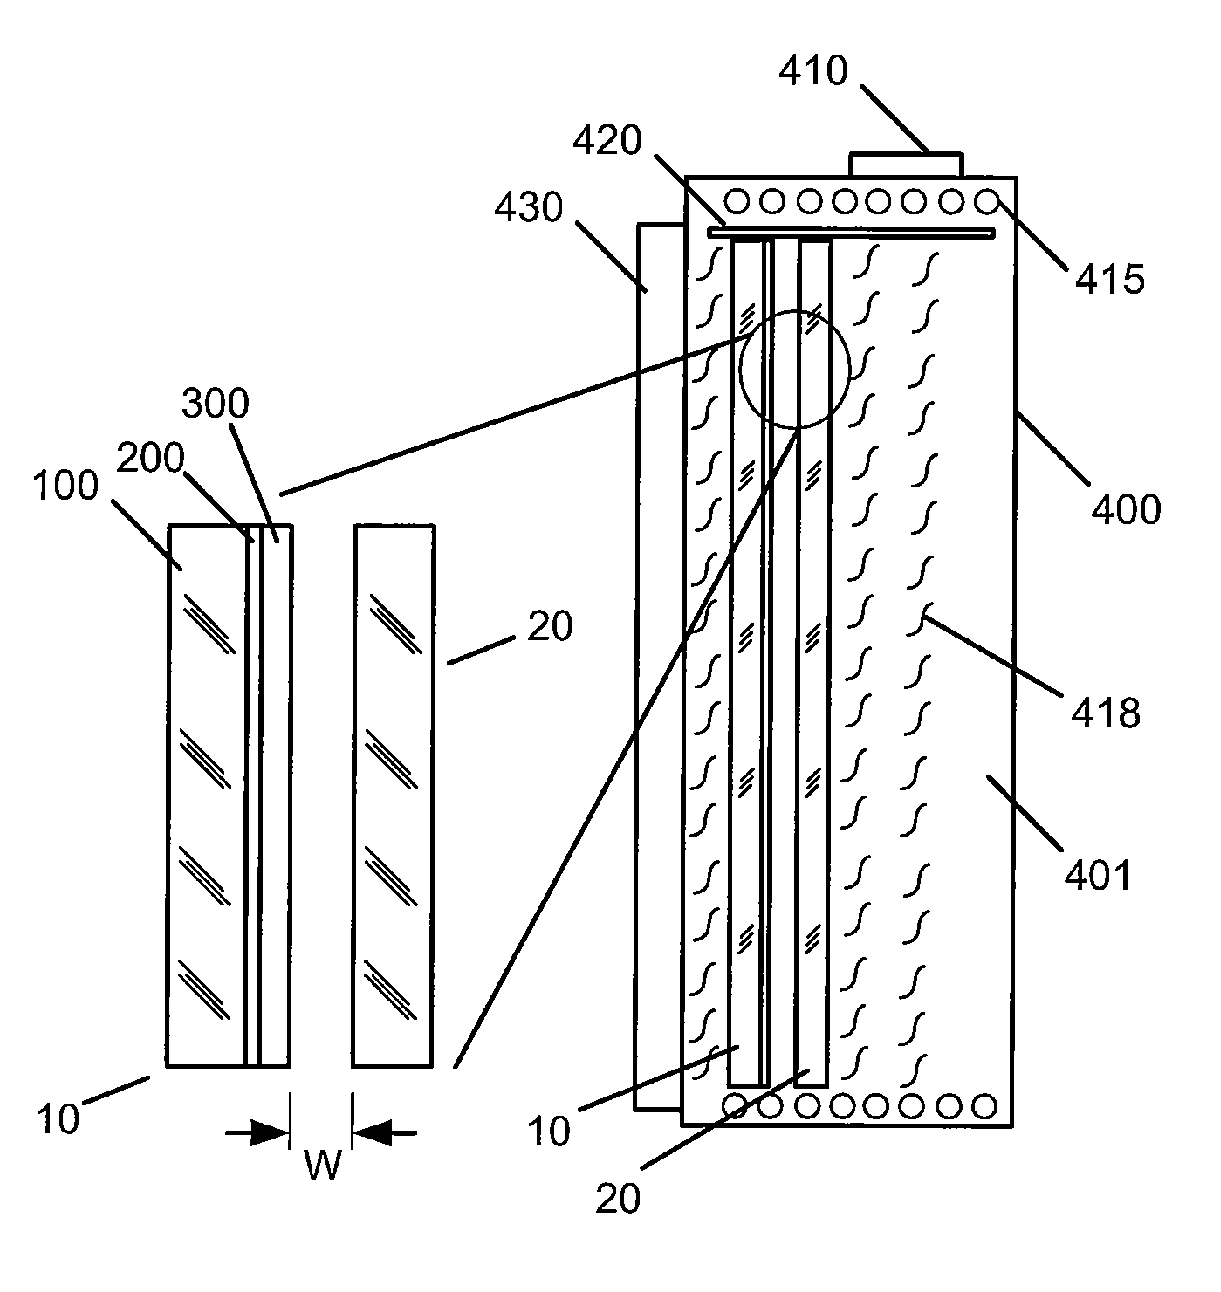 Sodium doping method and system of CIGS based materials using large scale batch processing